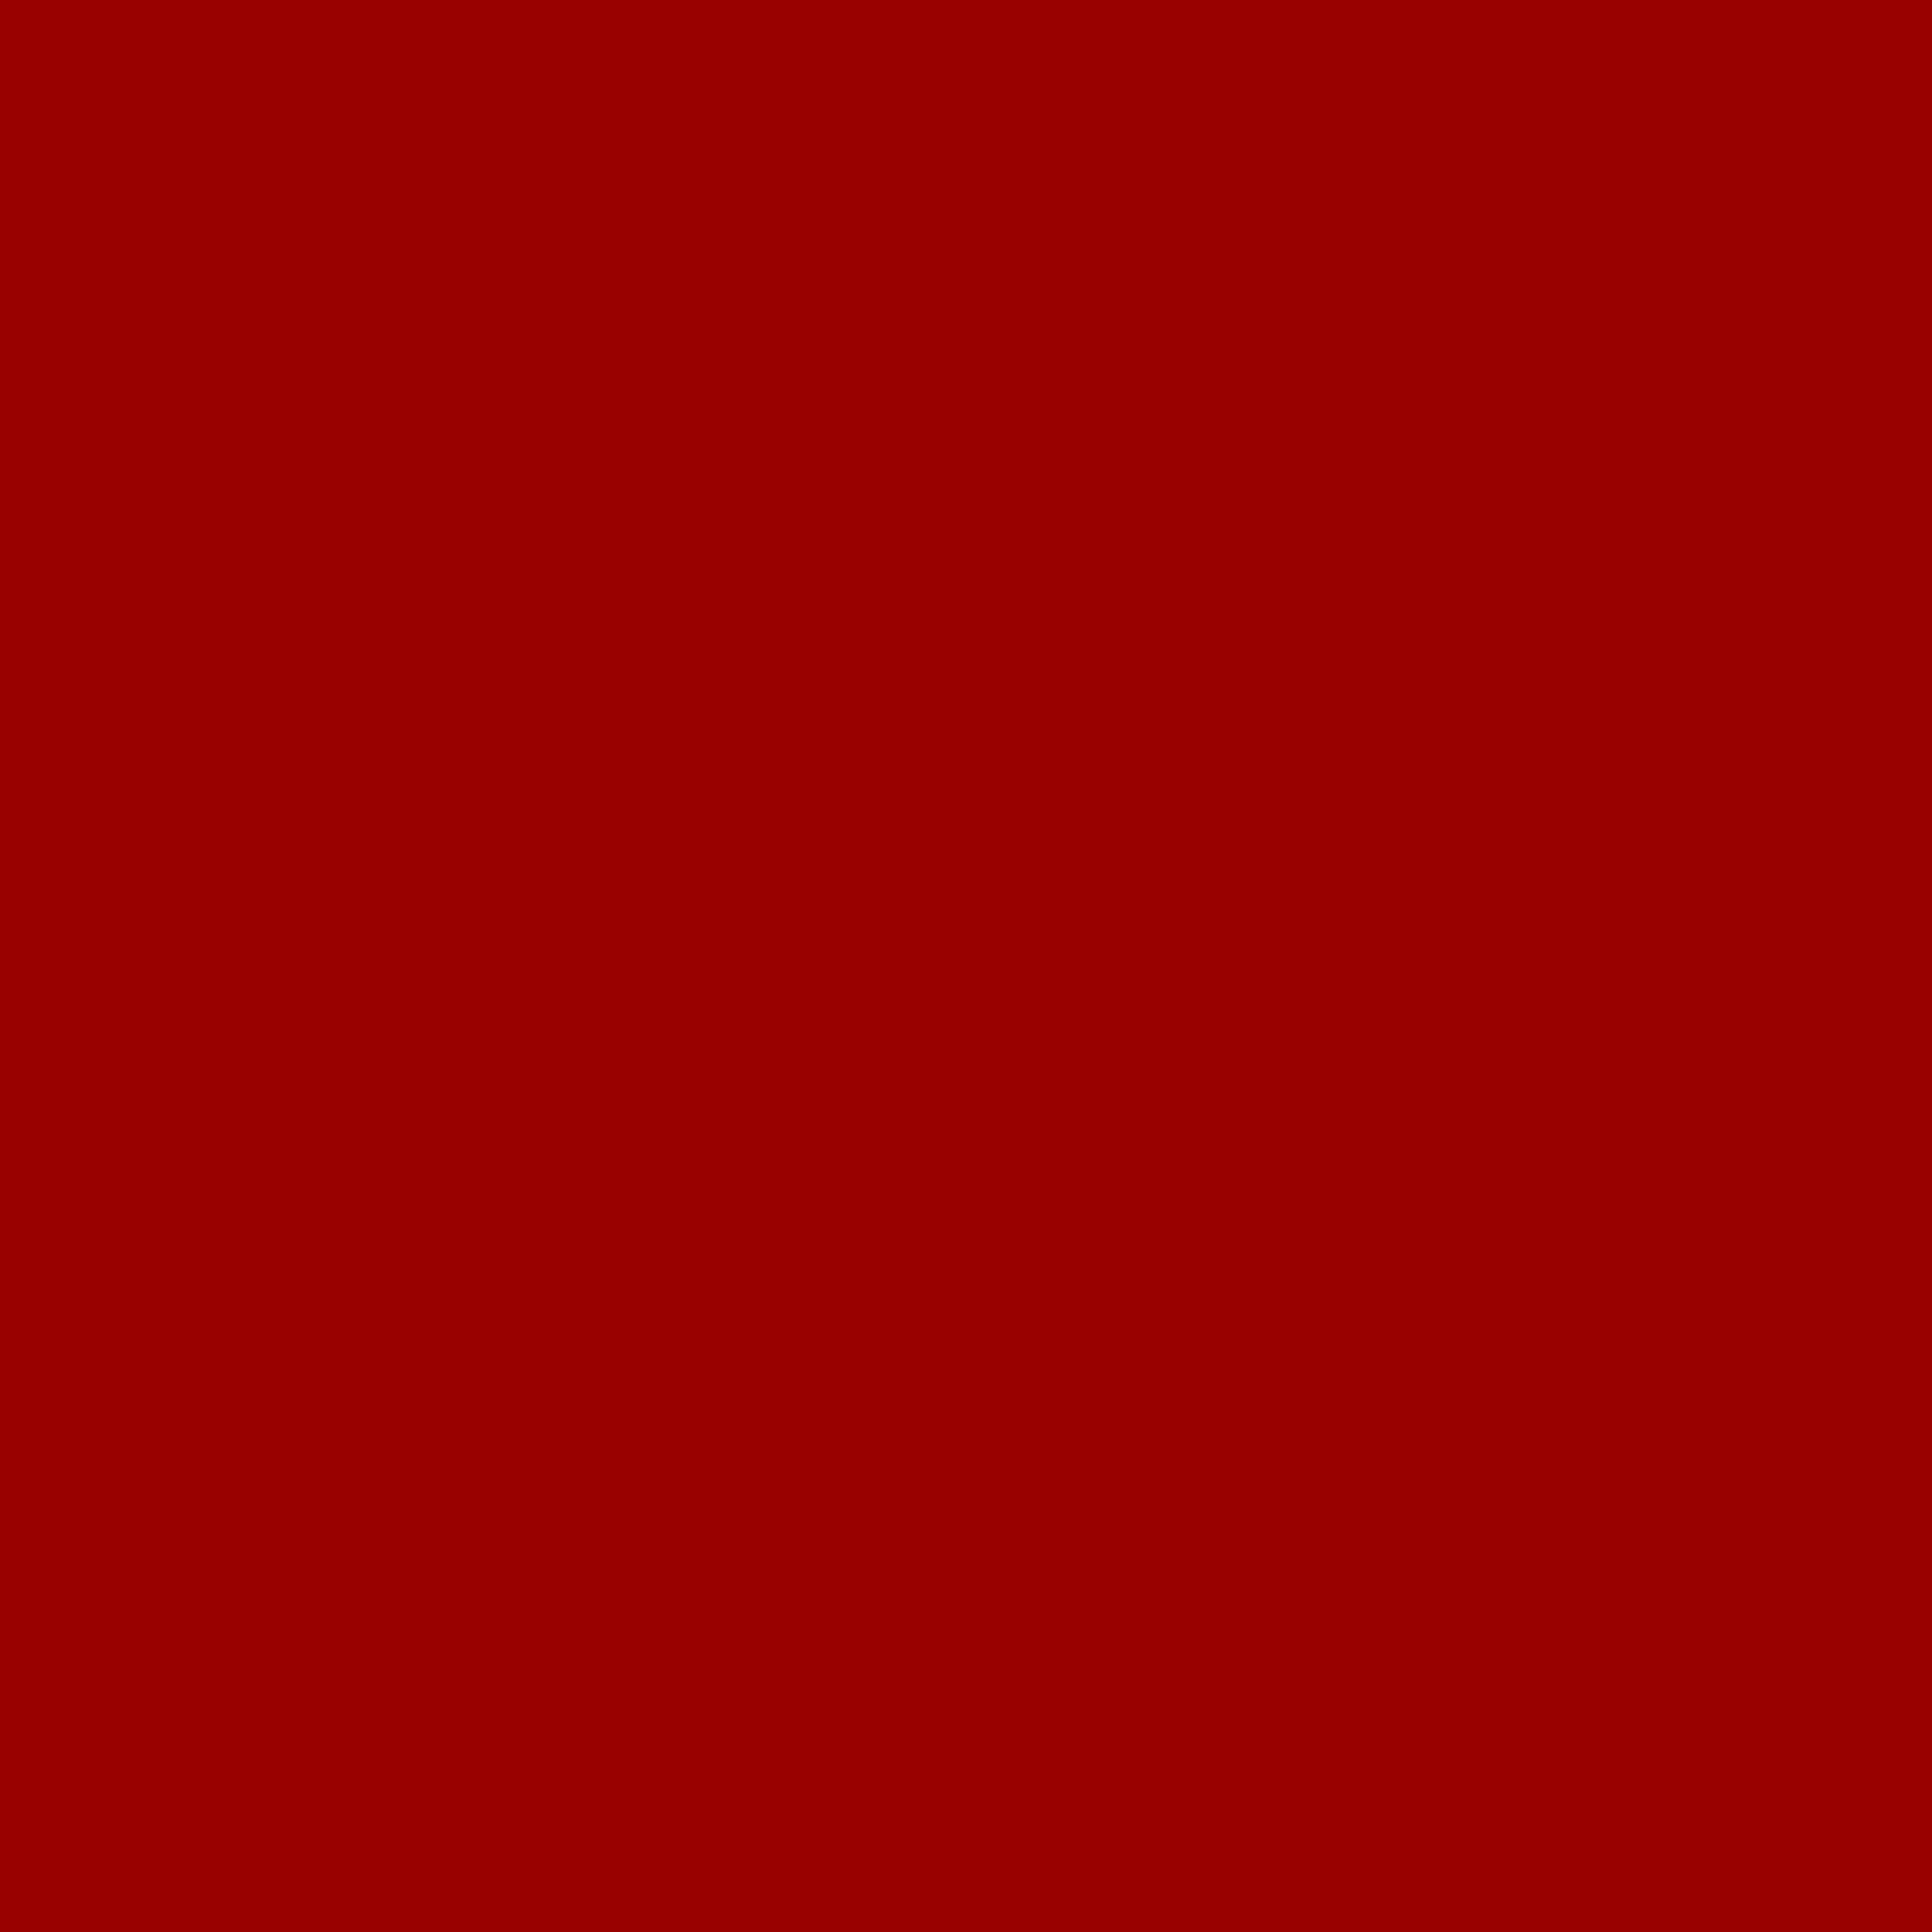 2732x2732 OU Crimson Red Solid Color Background